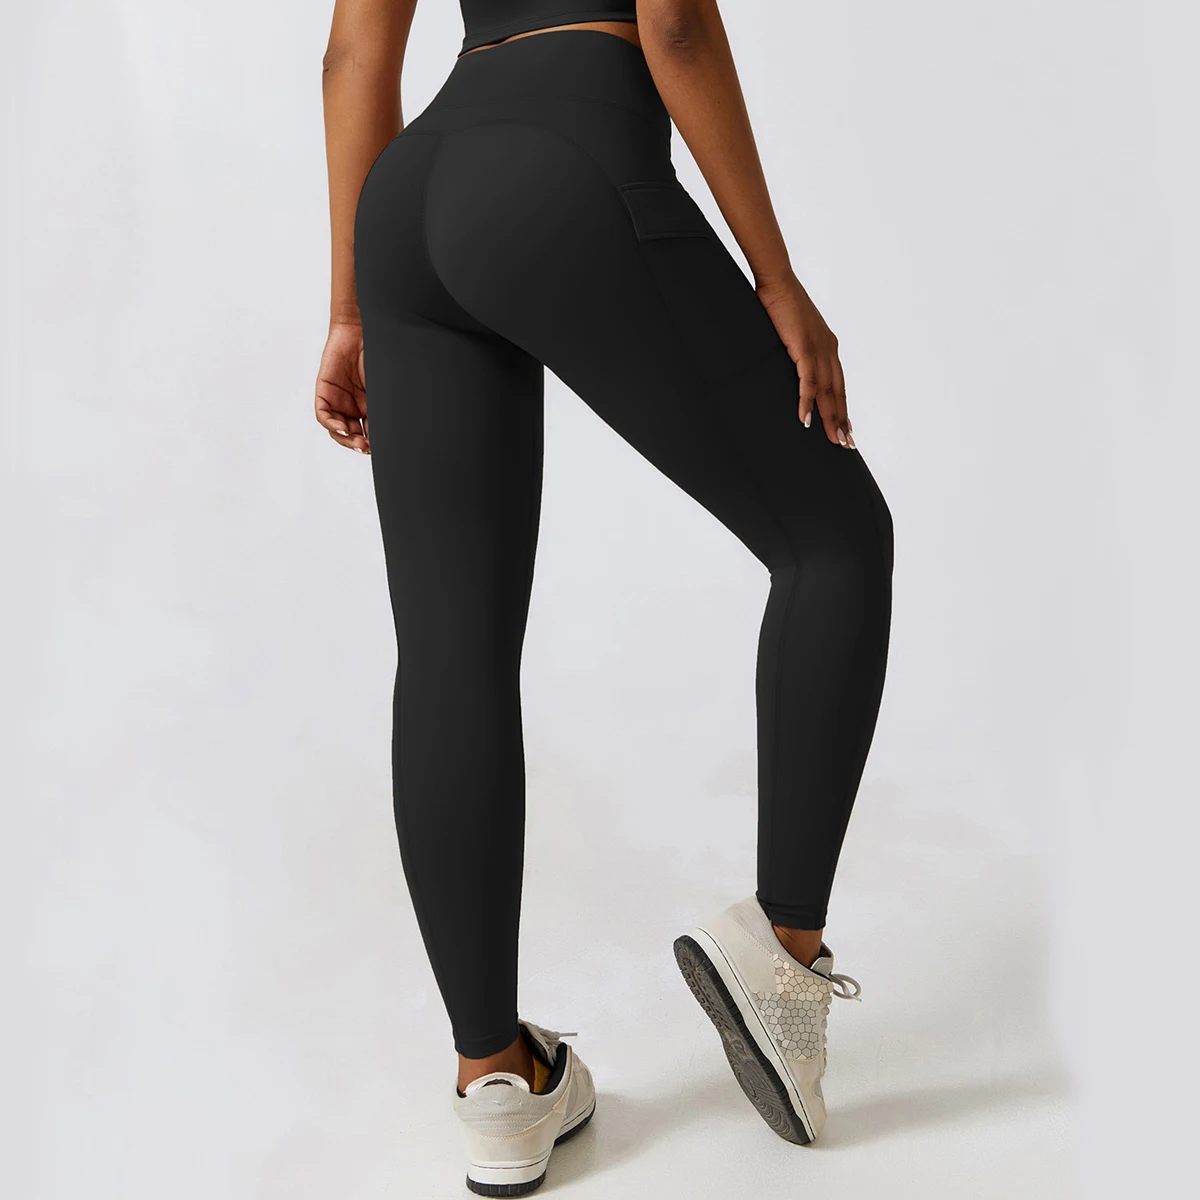 https://ae01.alicdn.com/kf/S6946477926624289826deee81ac506f5T/New-Aloe-Leggings-with-Pockets-Outdoor-Cycling-Workout-Pants-Lifting-Hips-Yoga-Activewear-Ropa-Deportiva-Mujer.jpg